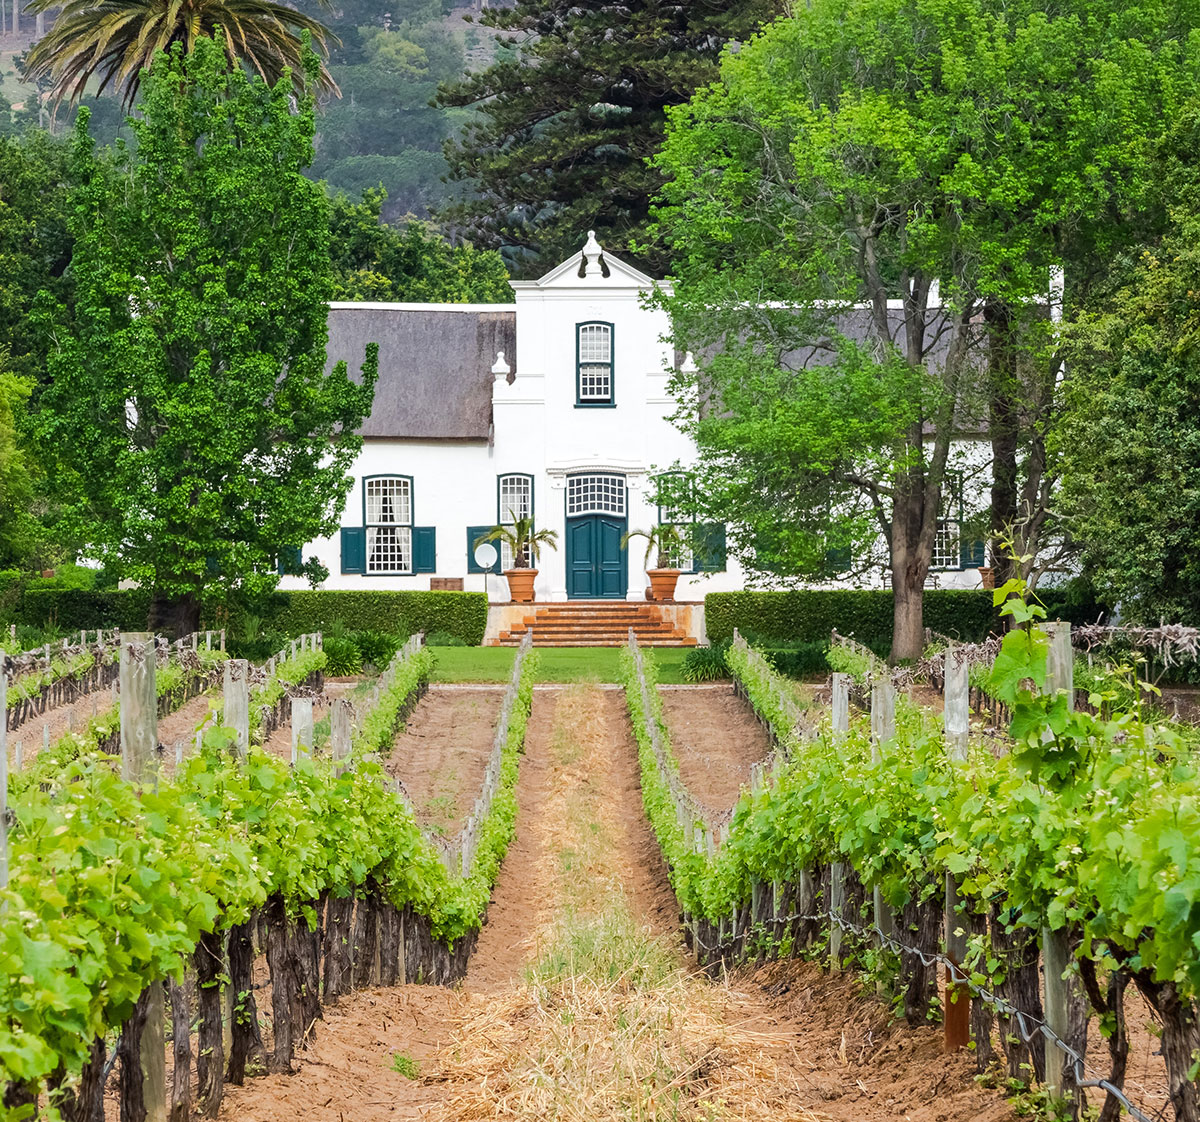 An old Cape Dutch manor house on a wine farm property in South Africa.